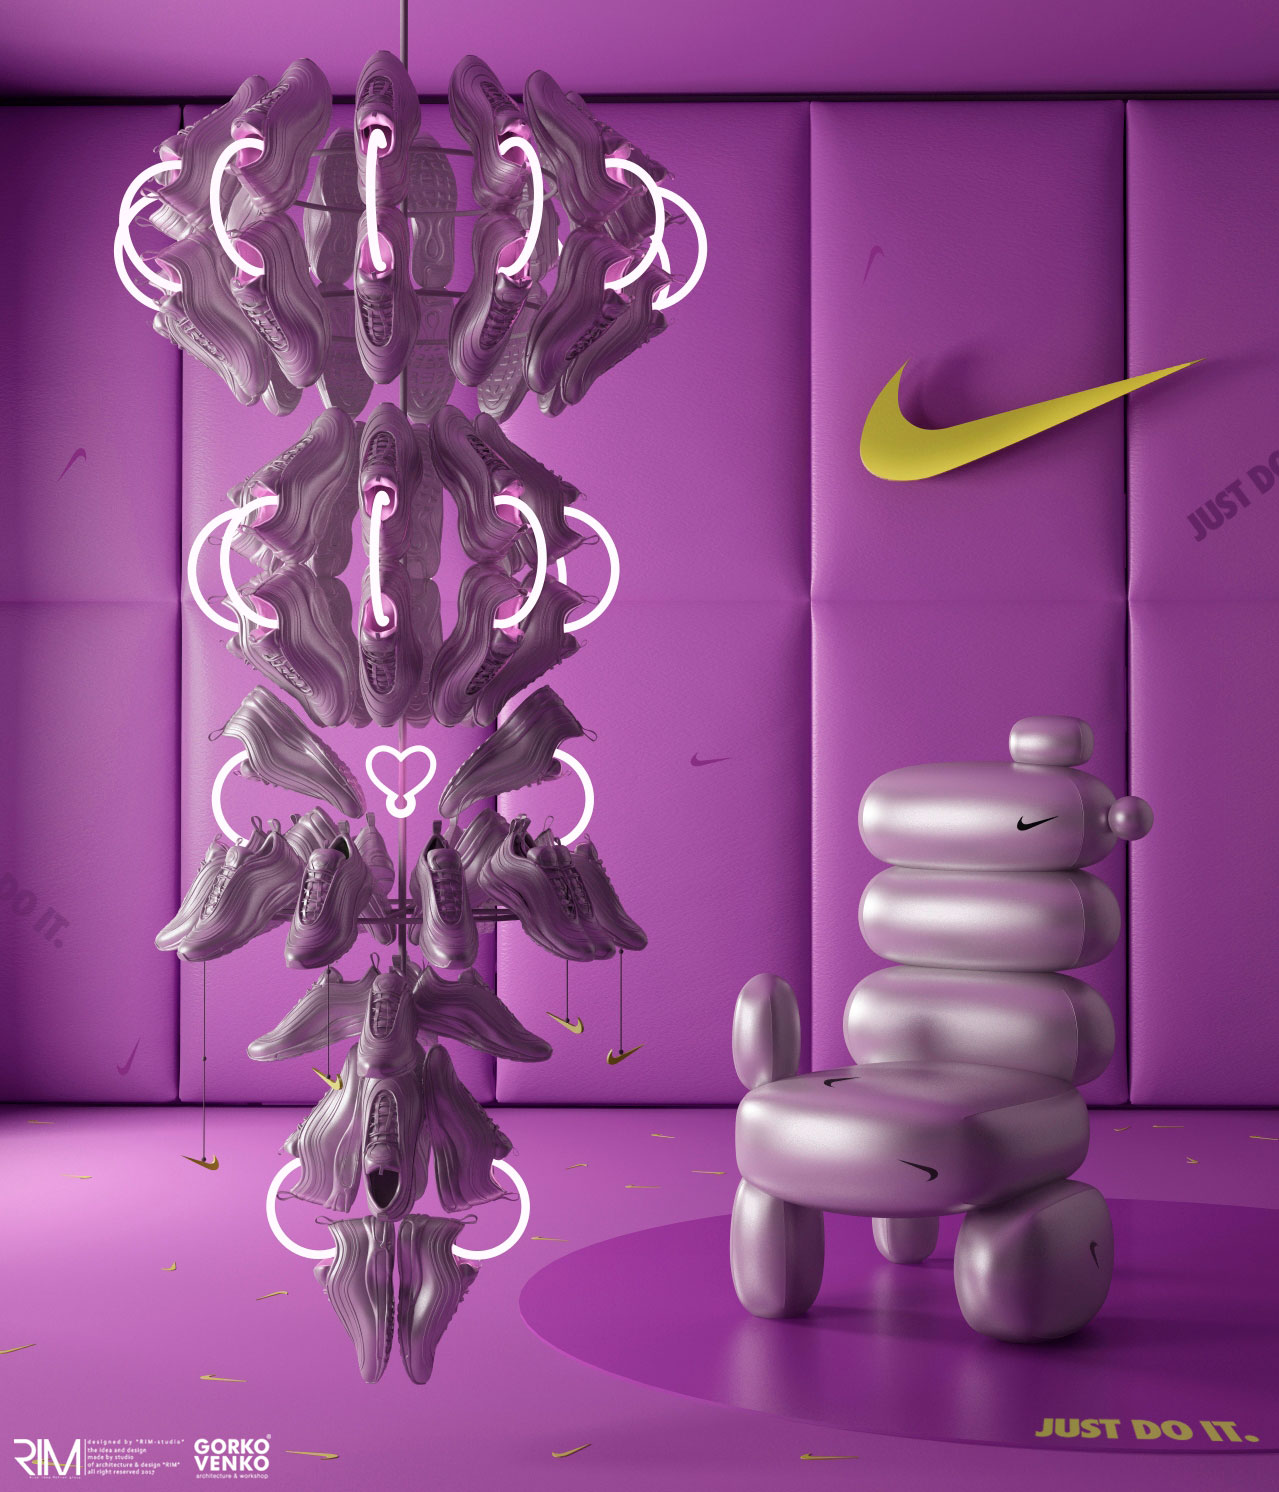 Nike Air Max Day 2020 conceptual expressive furniture collection - Изображение